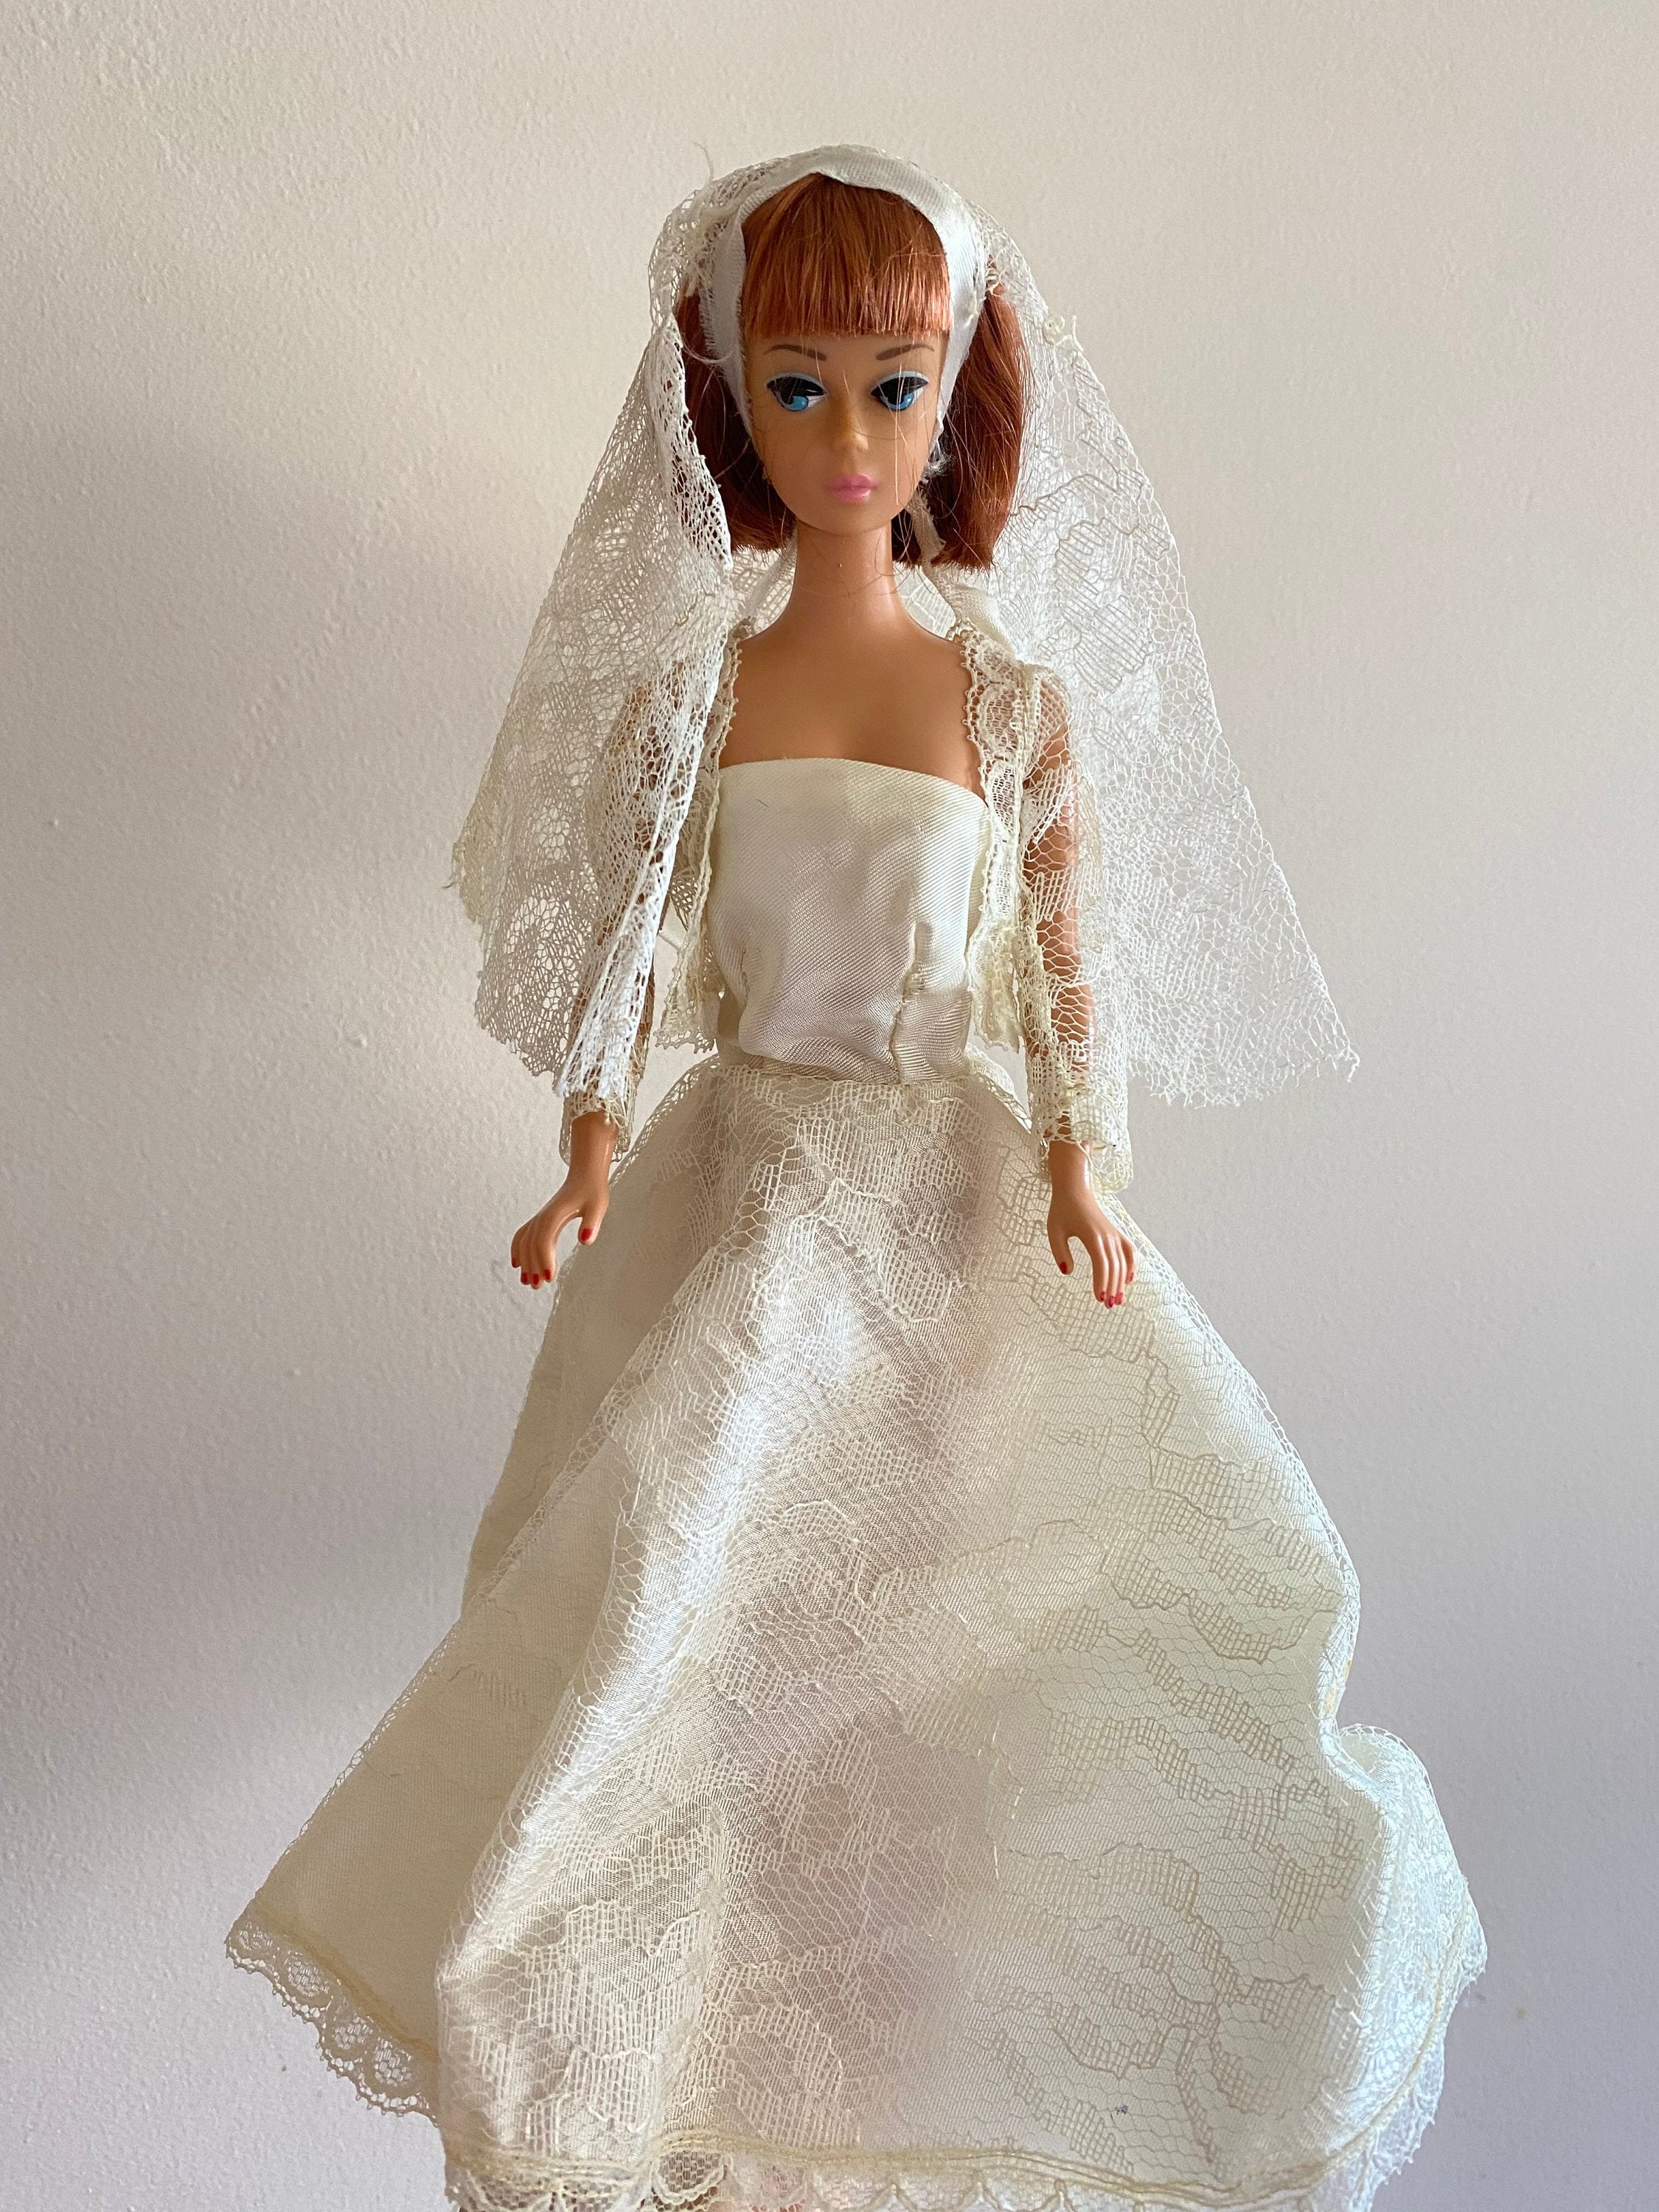 Vintage Barbie Clone White Satin and Lace With - Norway